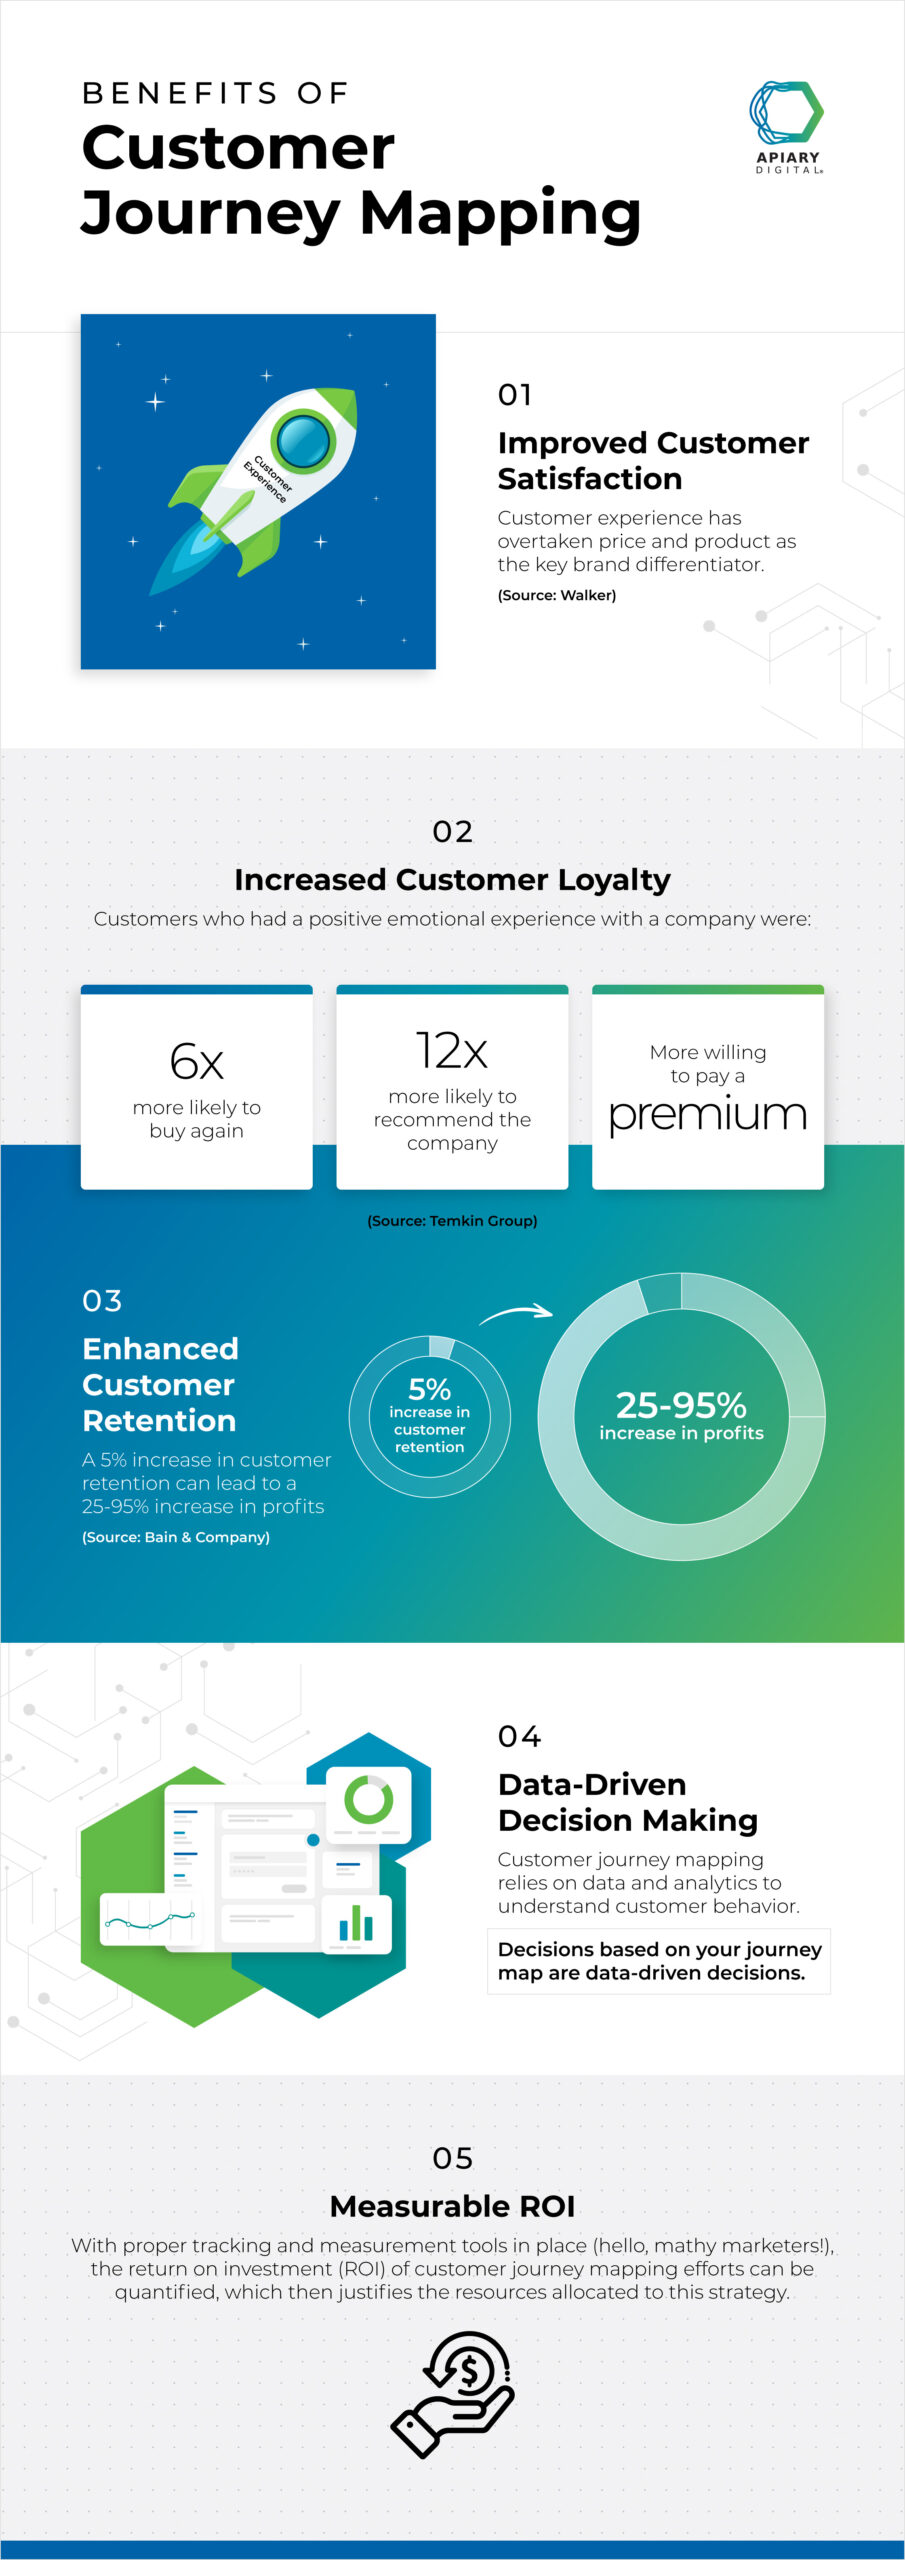 Benefits of customer journey mapping

Improved Customer Satisfaction 
Customer experience has overtaken price and product as the key brand differentiator. (Source: Walker)

Increased Customer Loyalty
Customers who had a positive emotional experience with a company were:
6 times more likely to buy again,
12 times more likely to recommend the company,
More willing to pay a premium. 
(Source: Temkin Group) 

Enhanced Customer Retention
A 5% increase in customer retention can lead to a 25-95% increase in profits (Source: Bain & Company)

Data-Driven Decision Making
Customer journey mapping relies on data and analytics to understand customer behavior. Decisions based on your journey map are data-driven decisions.

Measurable ROI
With proper tracking and measurement tools in place (hello, mathy marketers!), the return on investment (ROI) of customer journey mapping efforts can be quantified, which then justifies the resources allocated to this strategy.